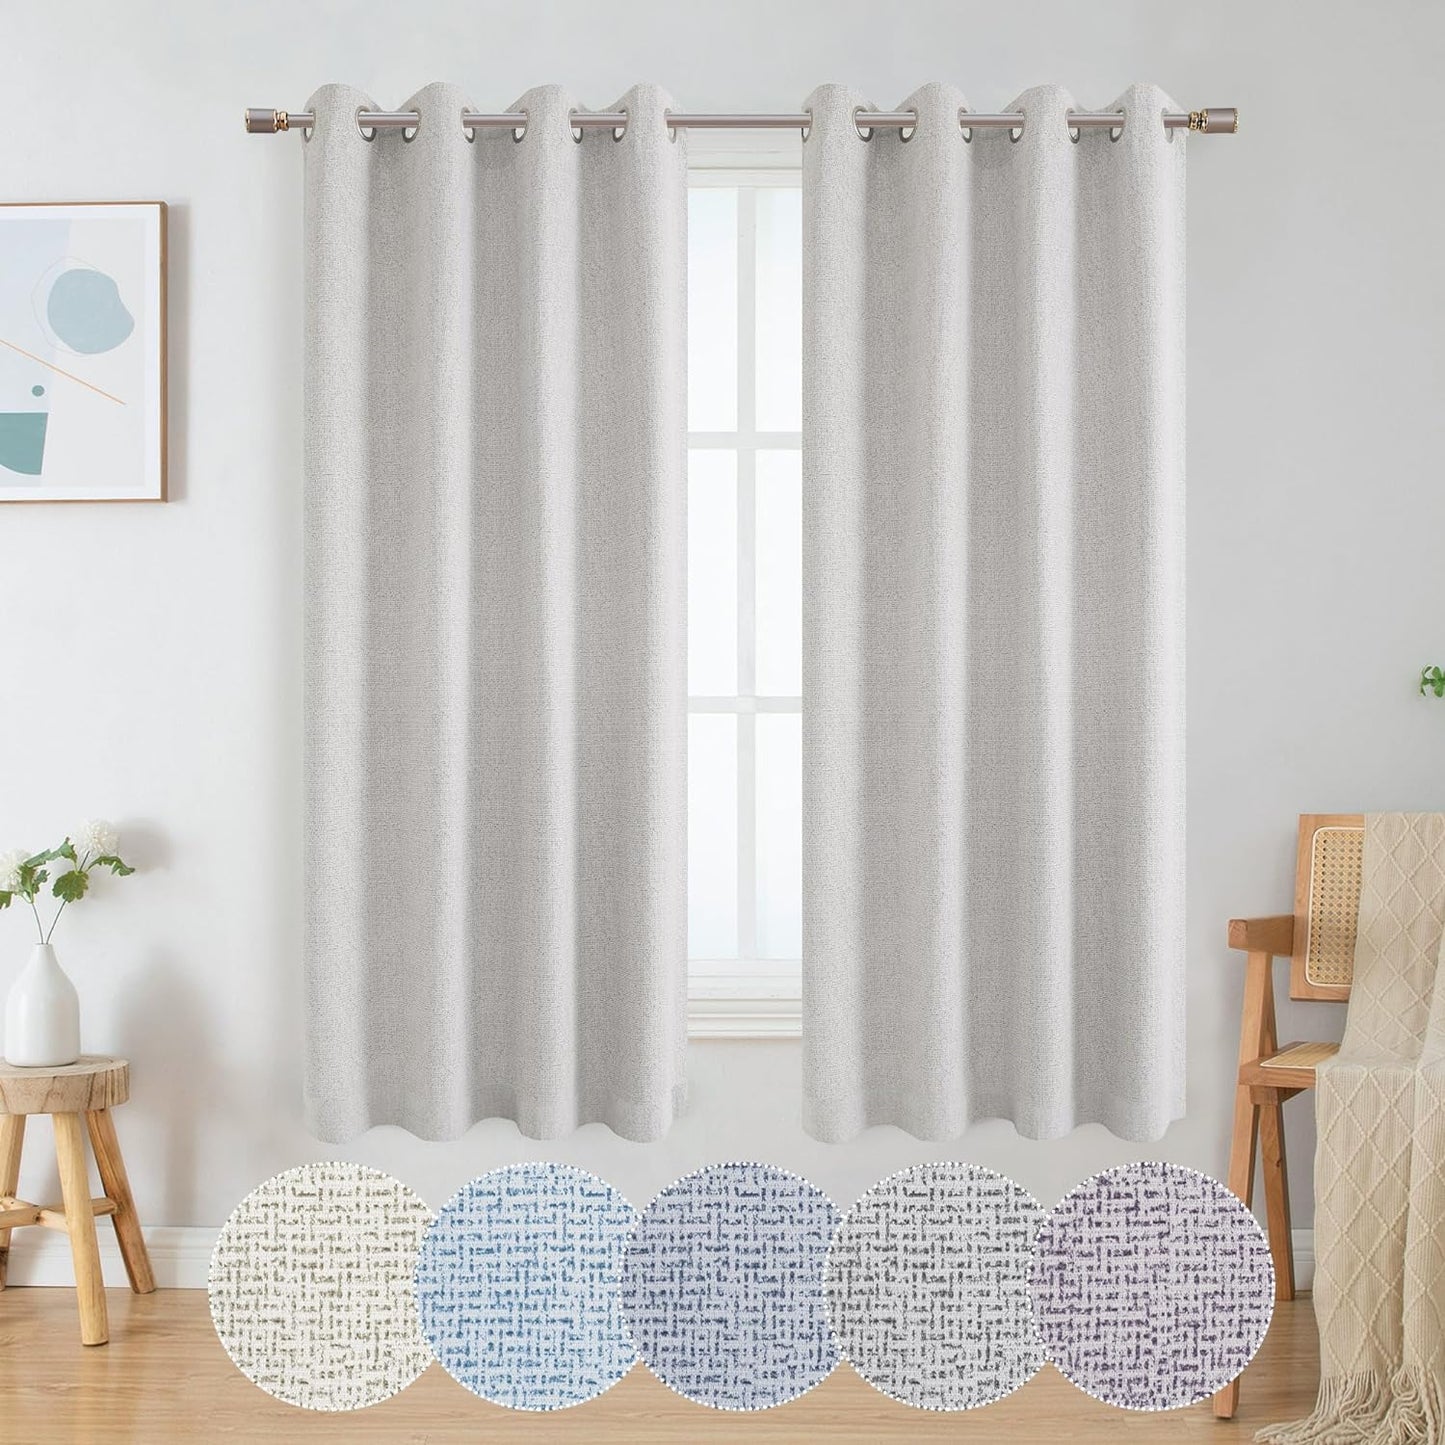 OWENIE Luke Black Out Curtains 63 Inch Long 2 Panels for Bedroom, Geometric Printed Completely Blackout Room Darkening Curtains, Grommet Thermal Insulated Living Room Curtain, 2 PCS, Each 42Wx63L Inch  OWENIE Taupe 42"W X 63"L | 2 Pcs 